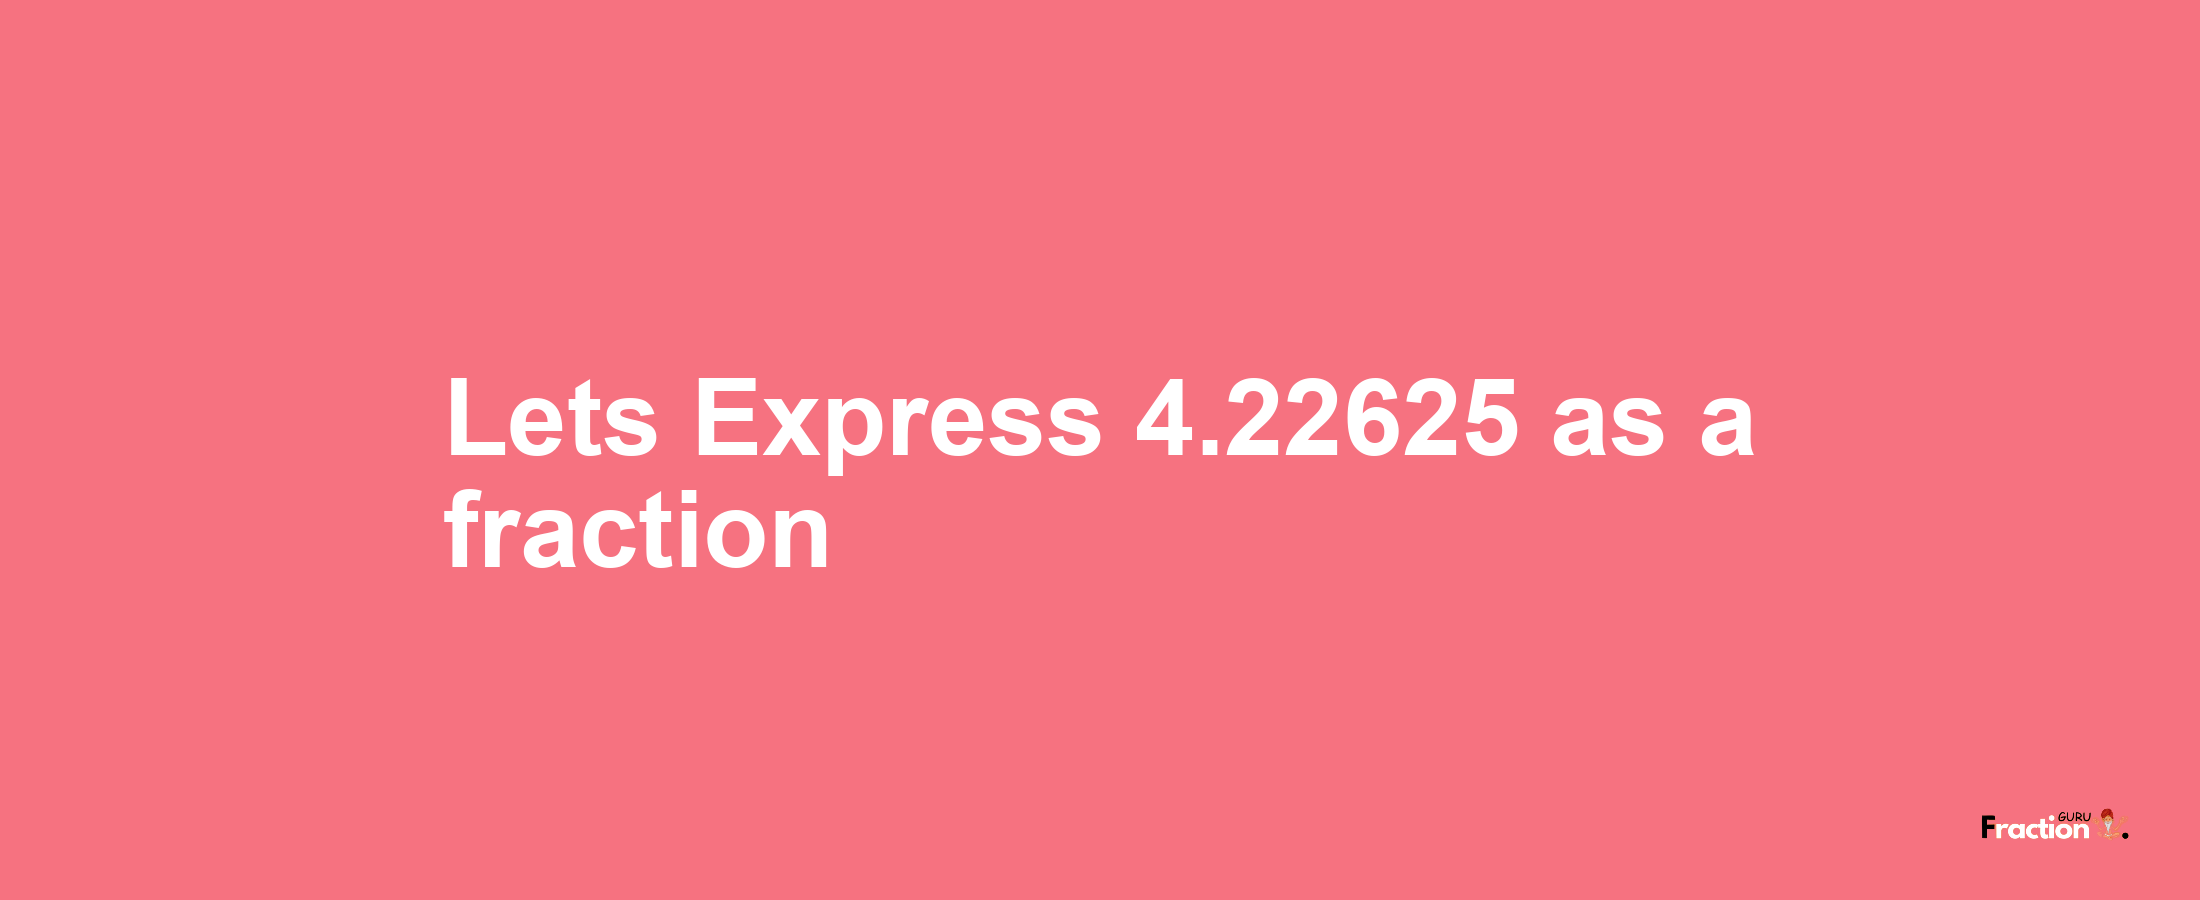 Lets Express 4.22625 as afraction